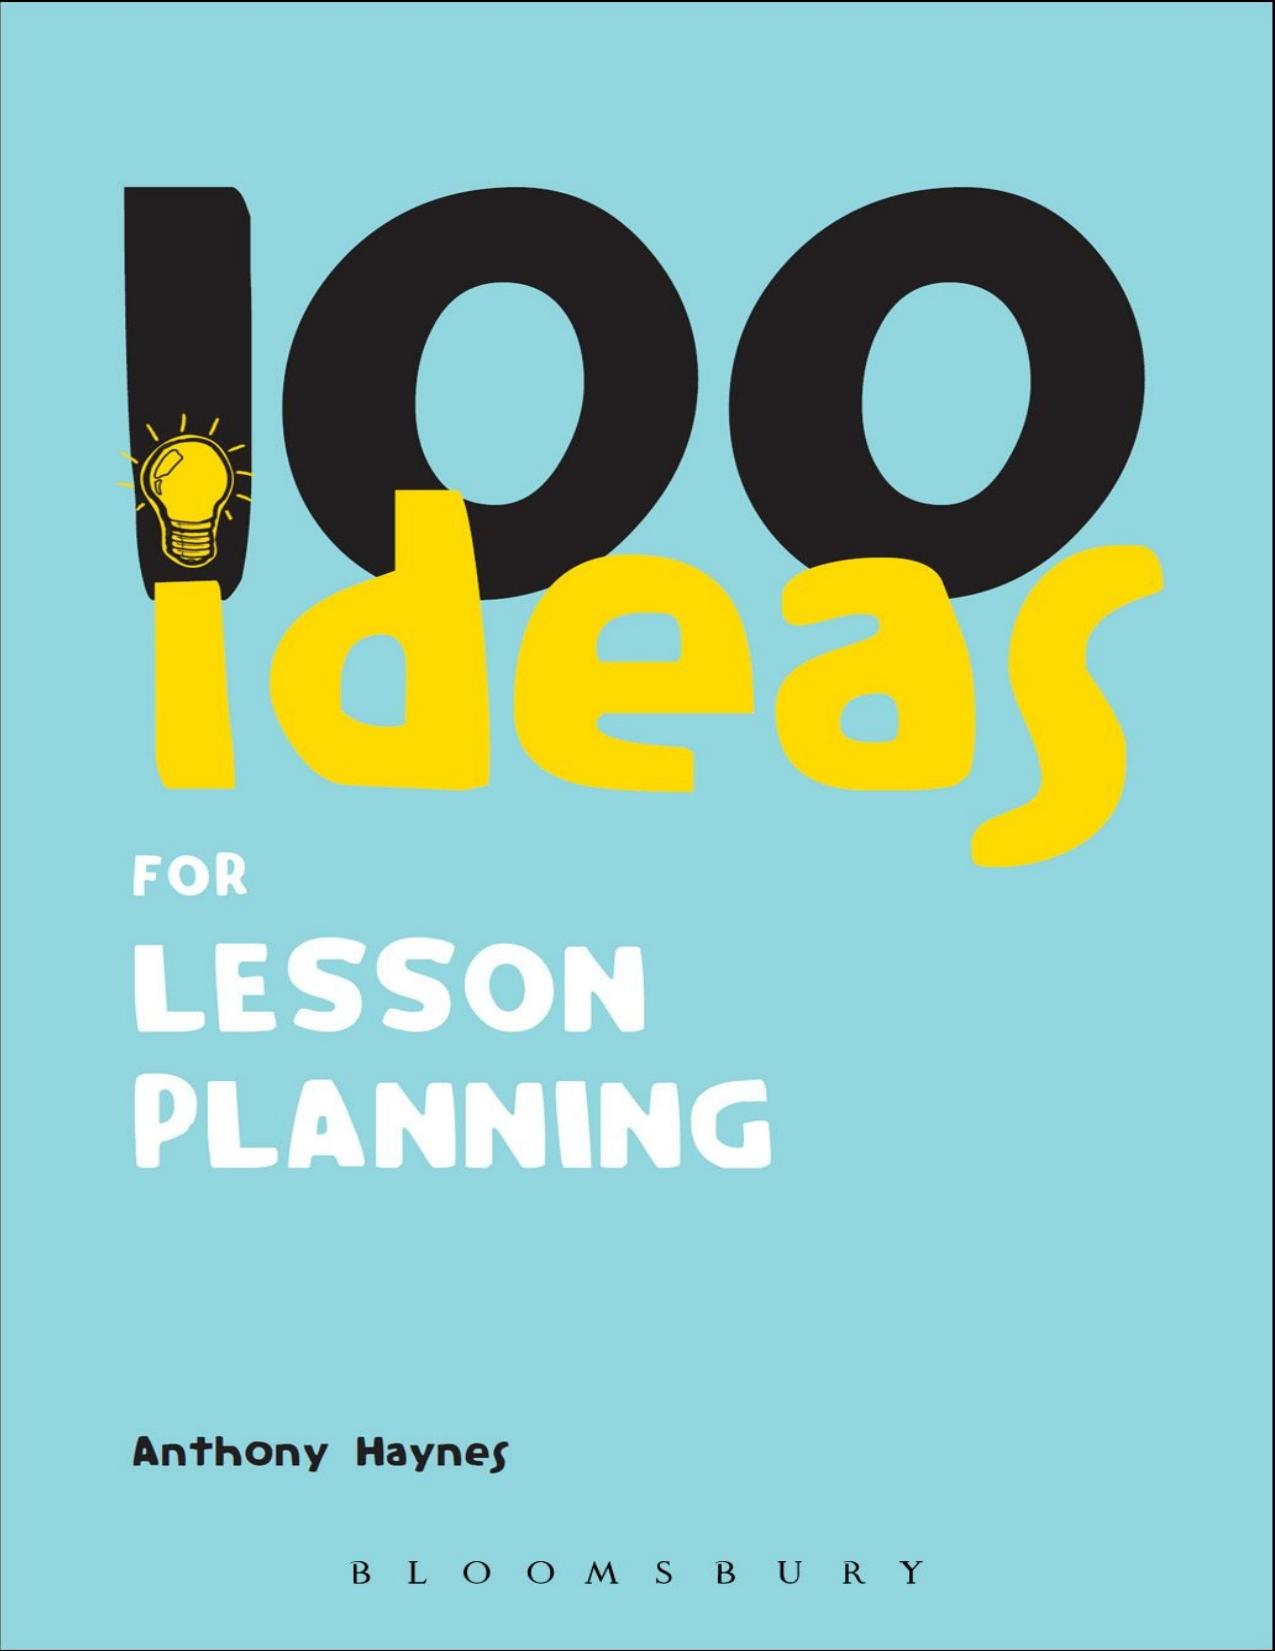 100 Ideas for Lesson Planning (Continuum One Hundreds).jpg